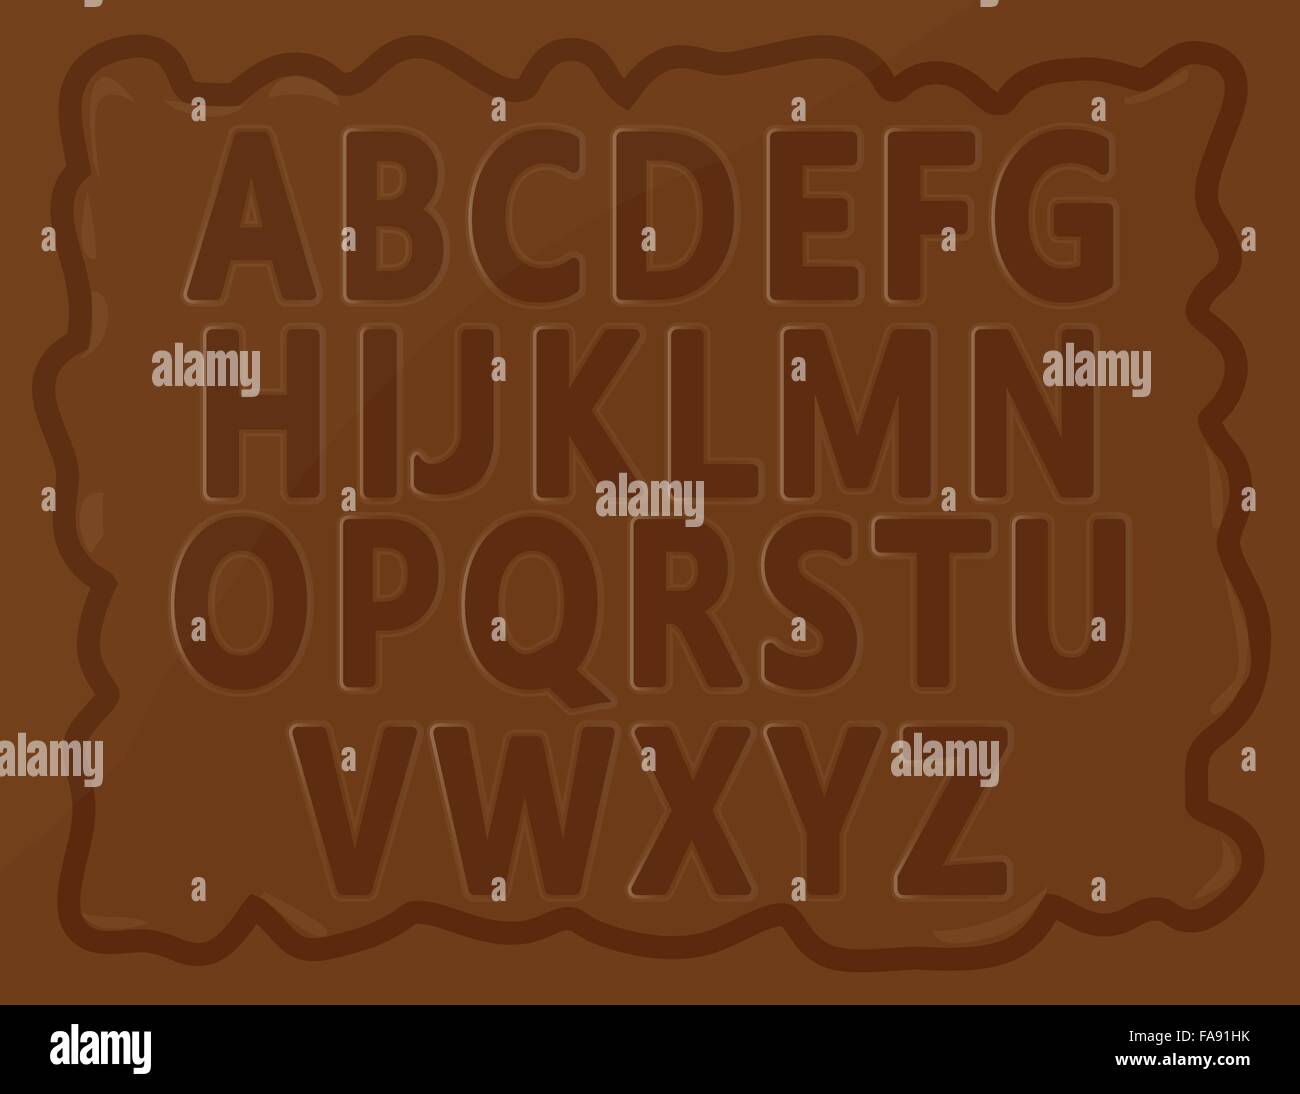 English alphabets for kids written on chocolate bar. Well arranged vector eps10 file is included. Stock Vector